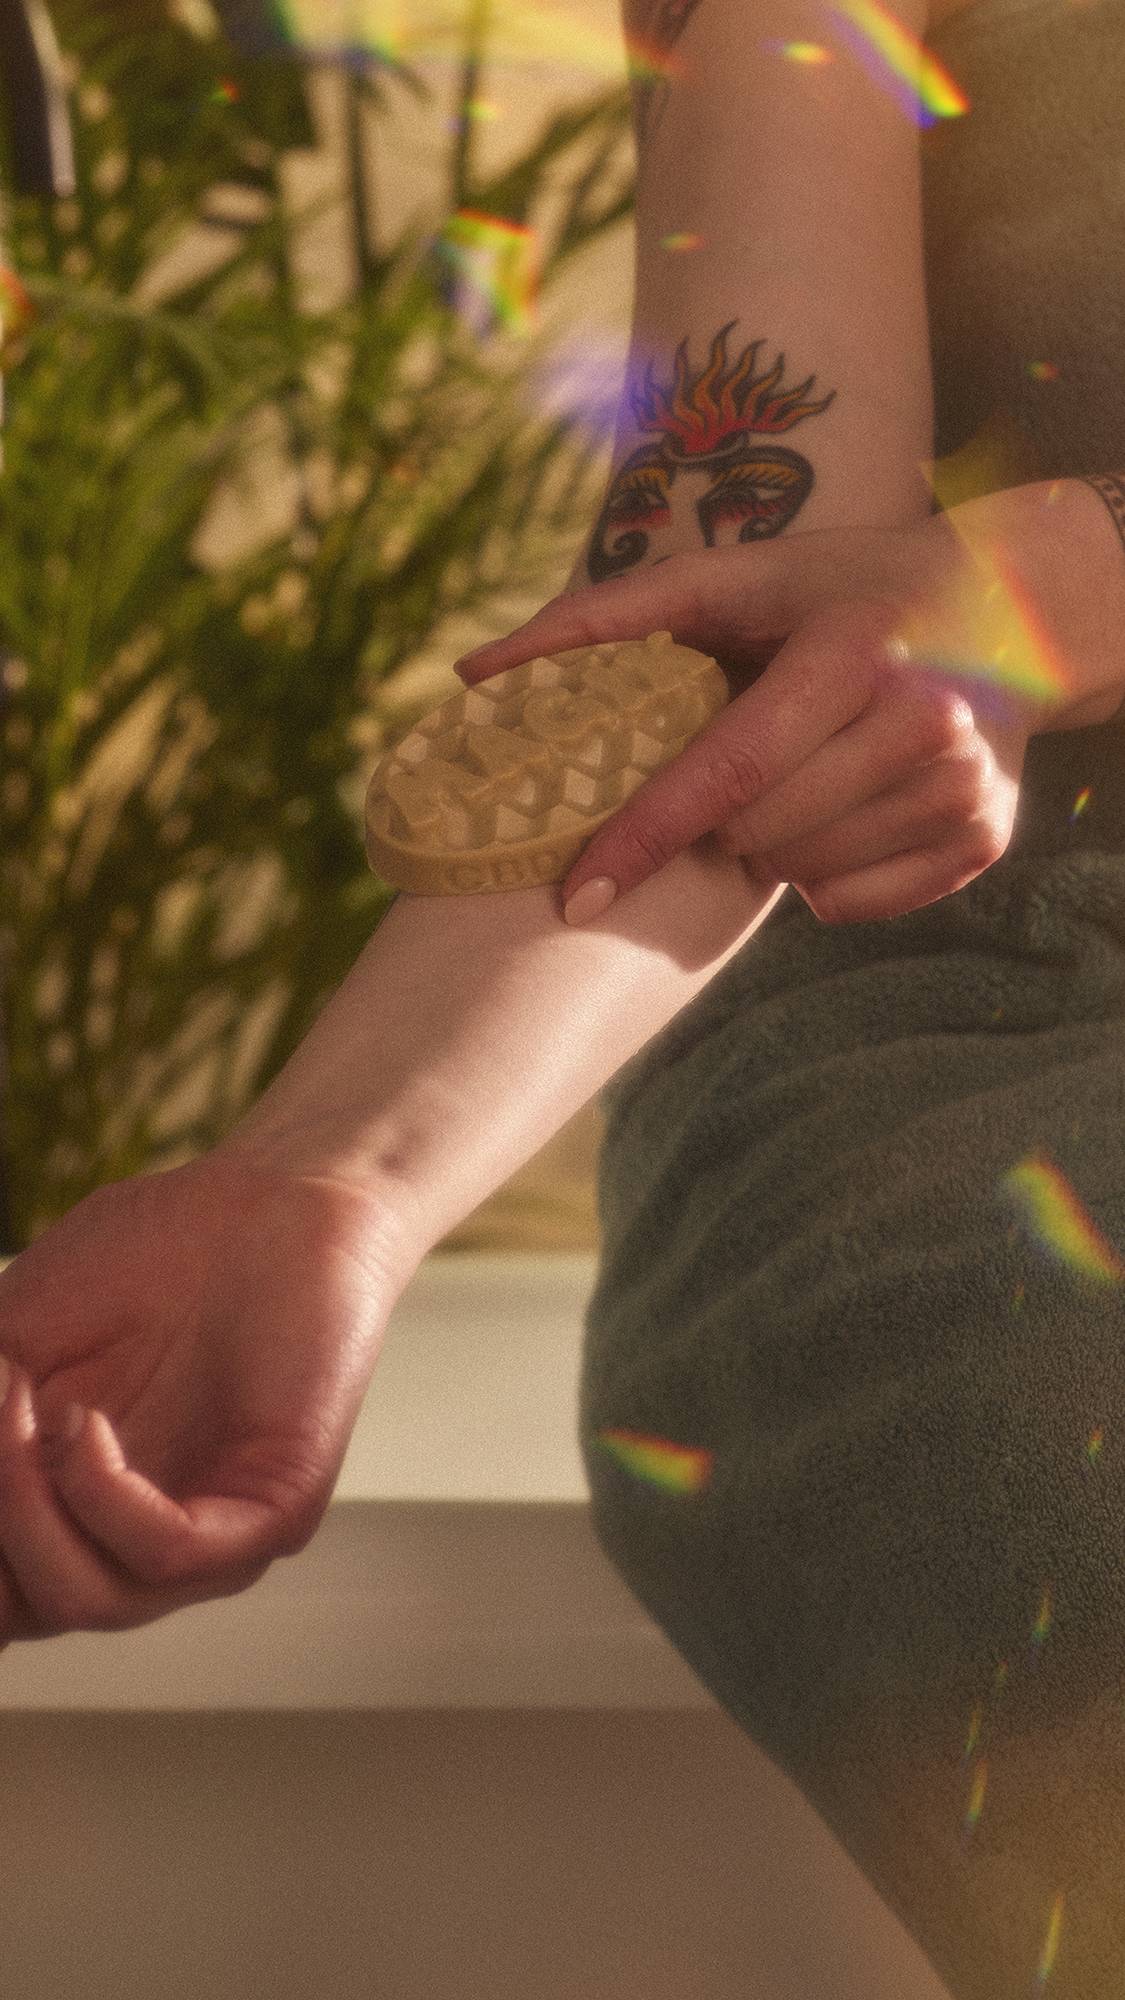 A close-up image of the model holding the Magik massage bar and smoothing it over their forearm. The image has flecks of rainbow reflections on a warm, sepia tone.